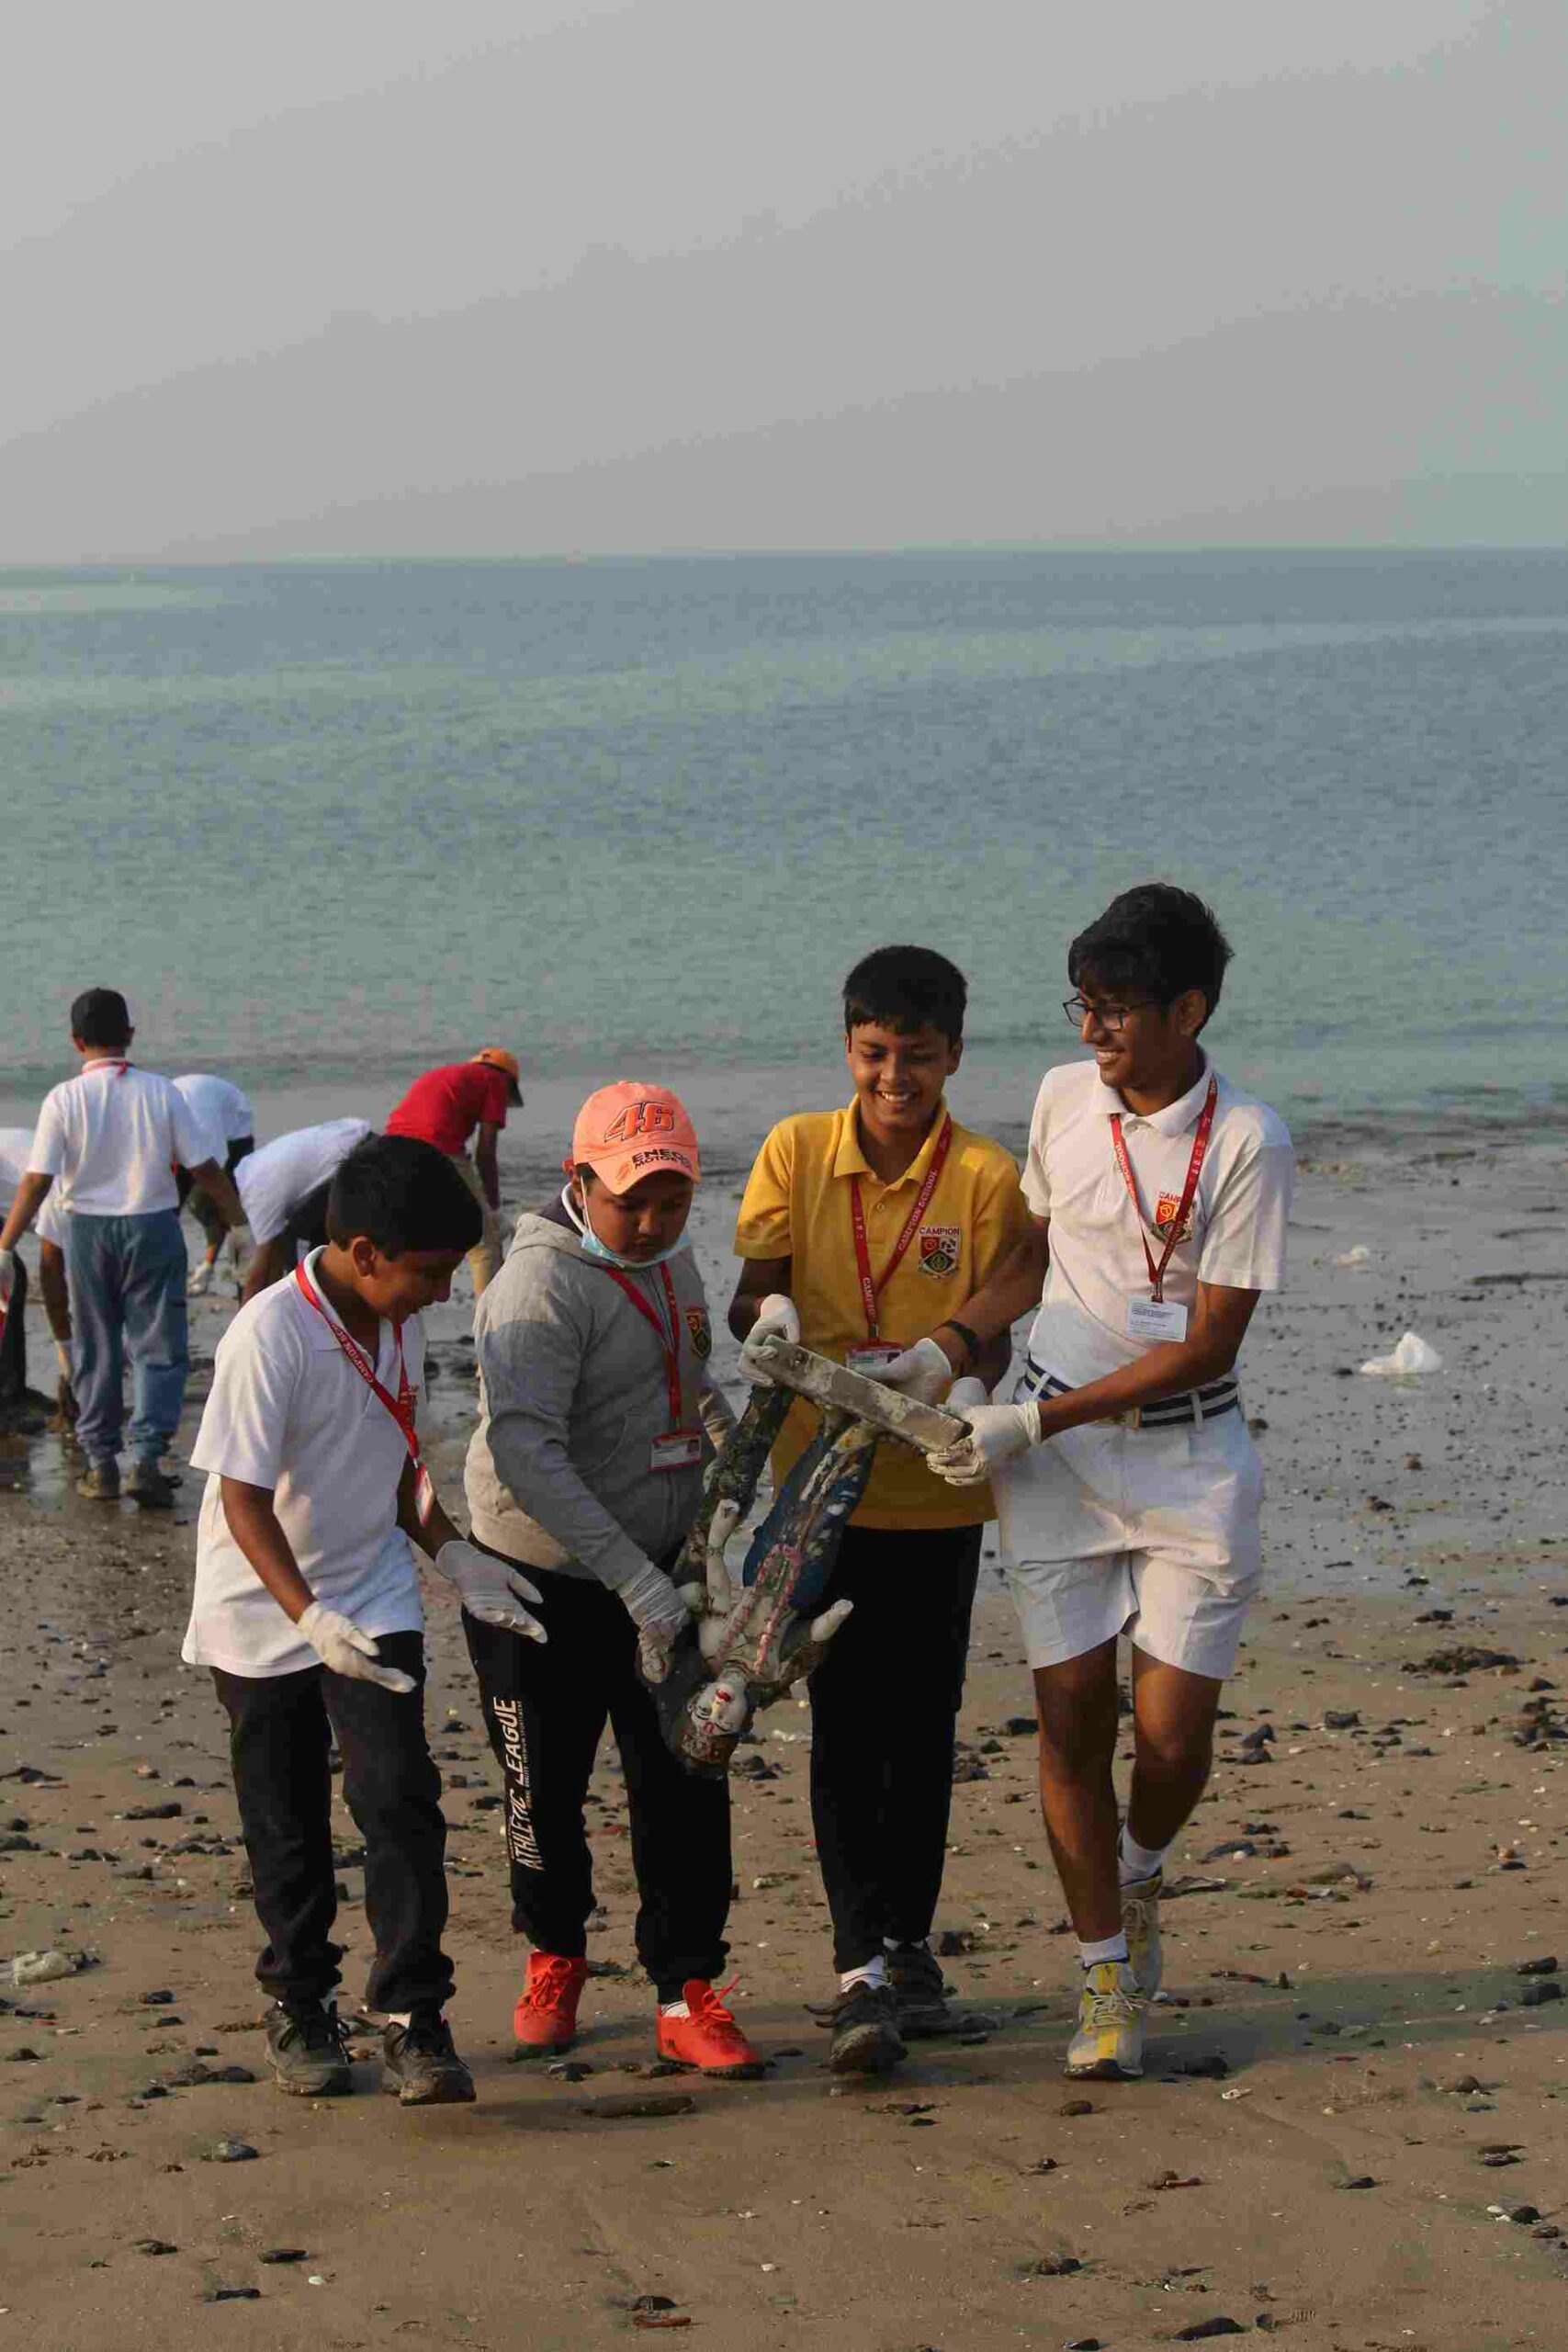 People of all age groups can be a part of these beach cleanup sessions